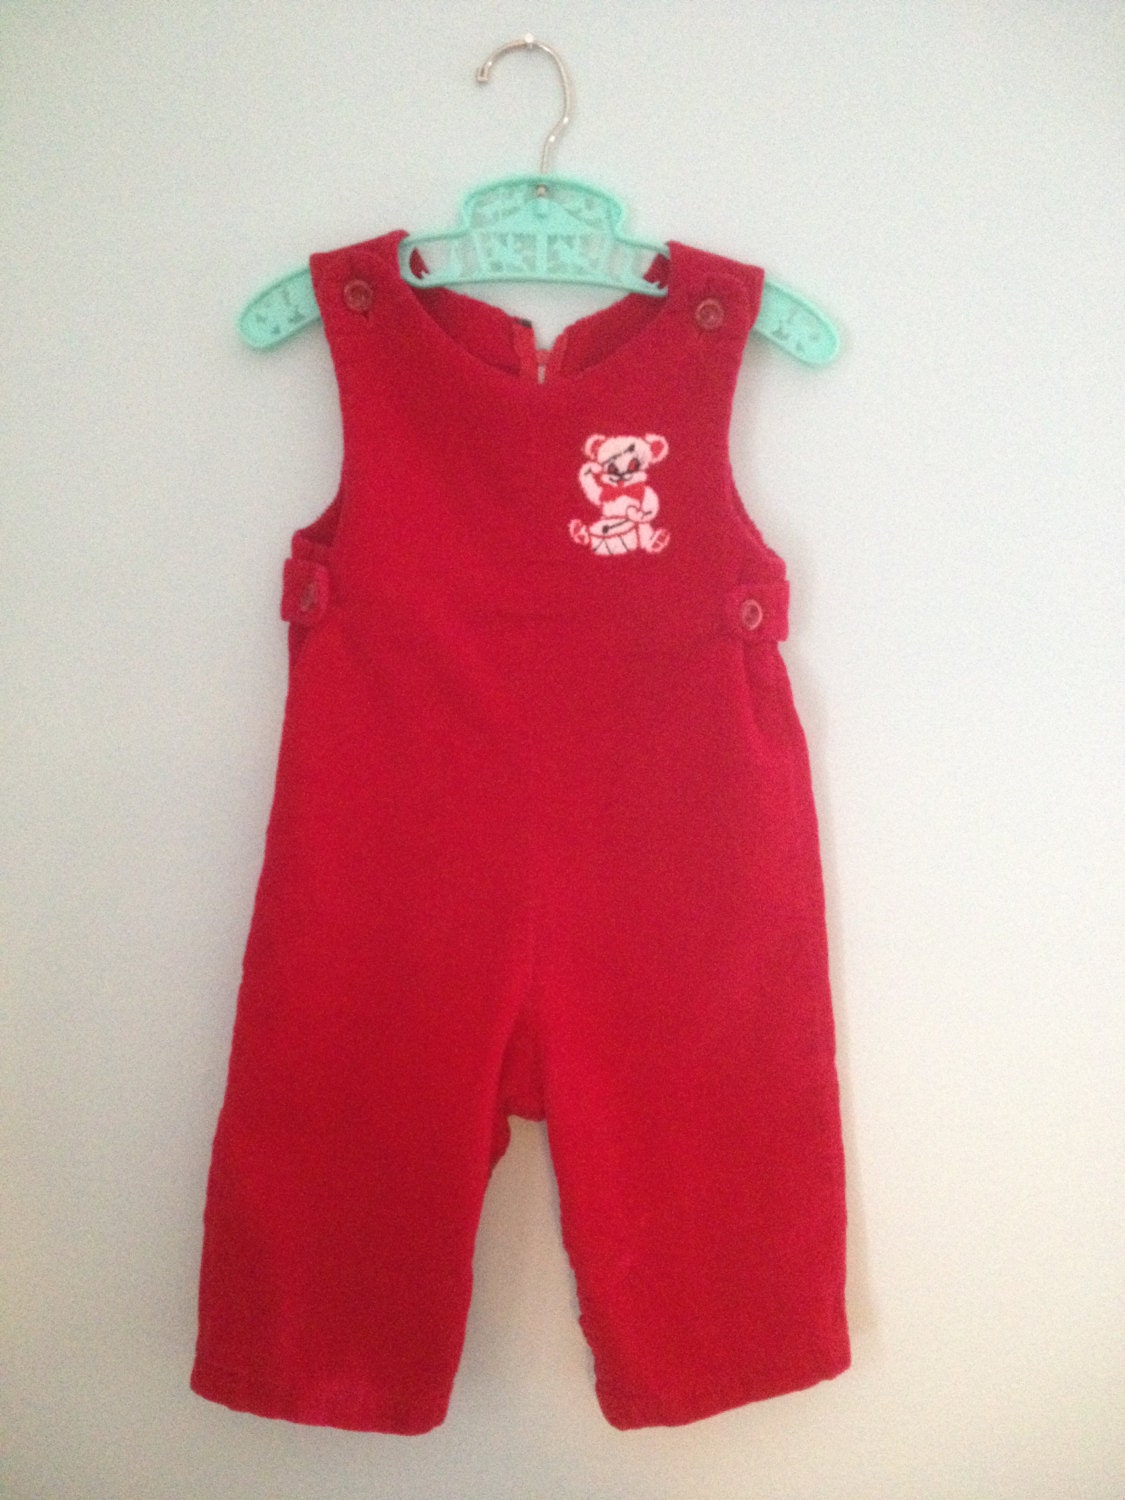 Vintage Red Corduroy Overalls with Teddy Bear Applique 9-12mo - toadstoolvintage